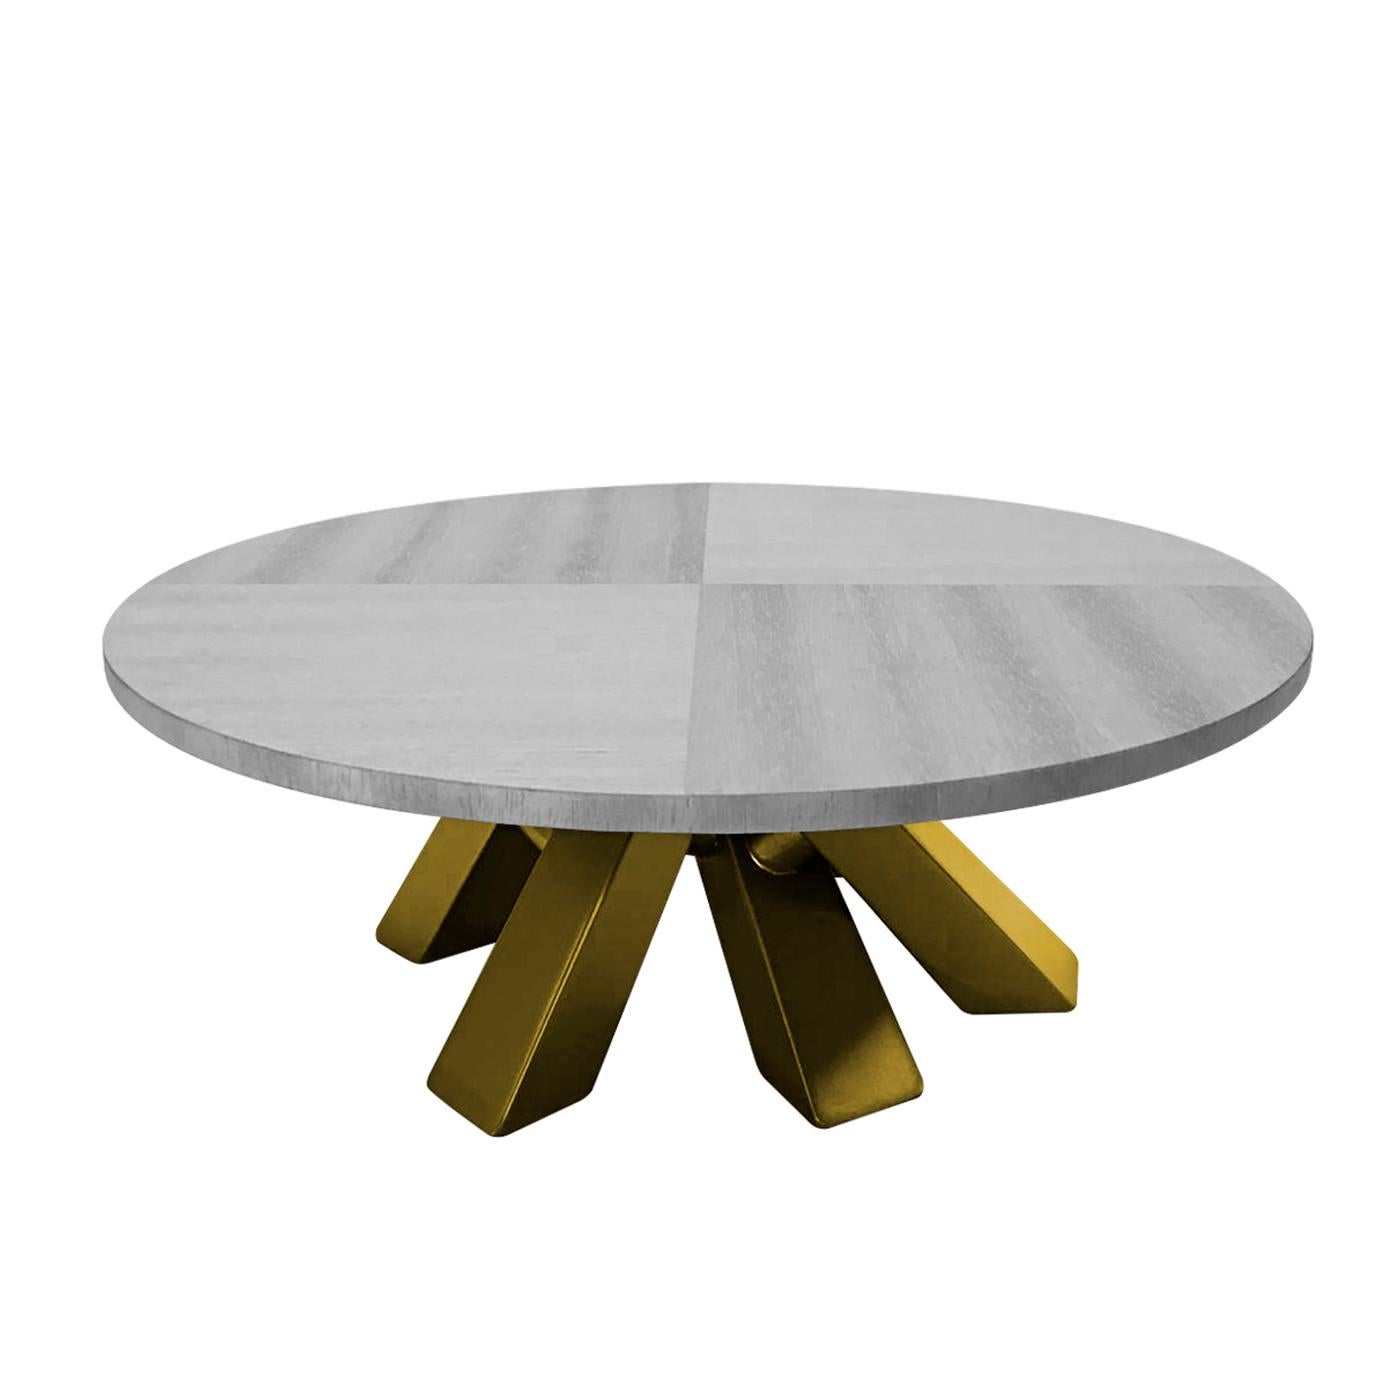 Brimming with sculptural flair, this dining table will complement dining spaces with more than mere functionality, its bronze-finished metal base striking with its dynamic look and opulent allure. The top, offered in gray-stained wood, creates a